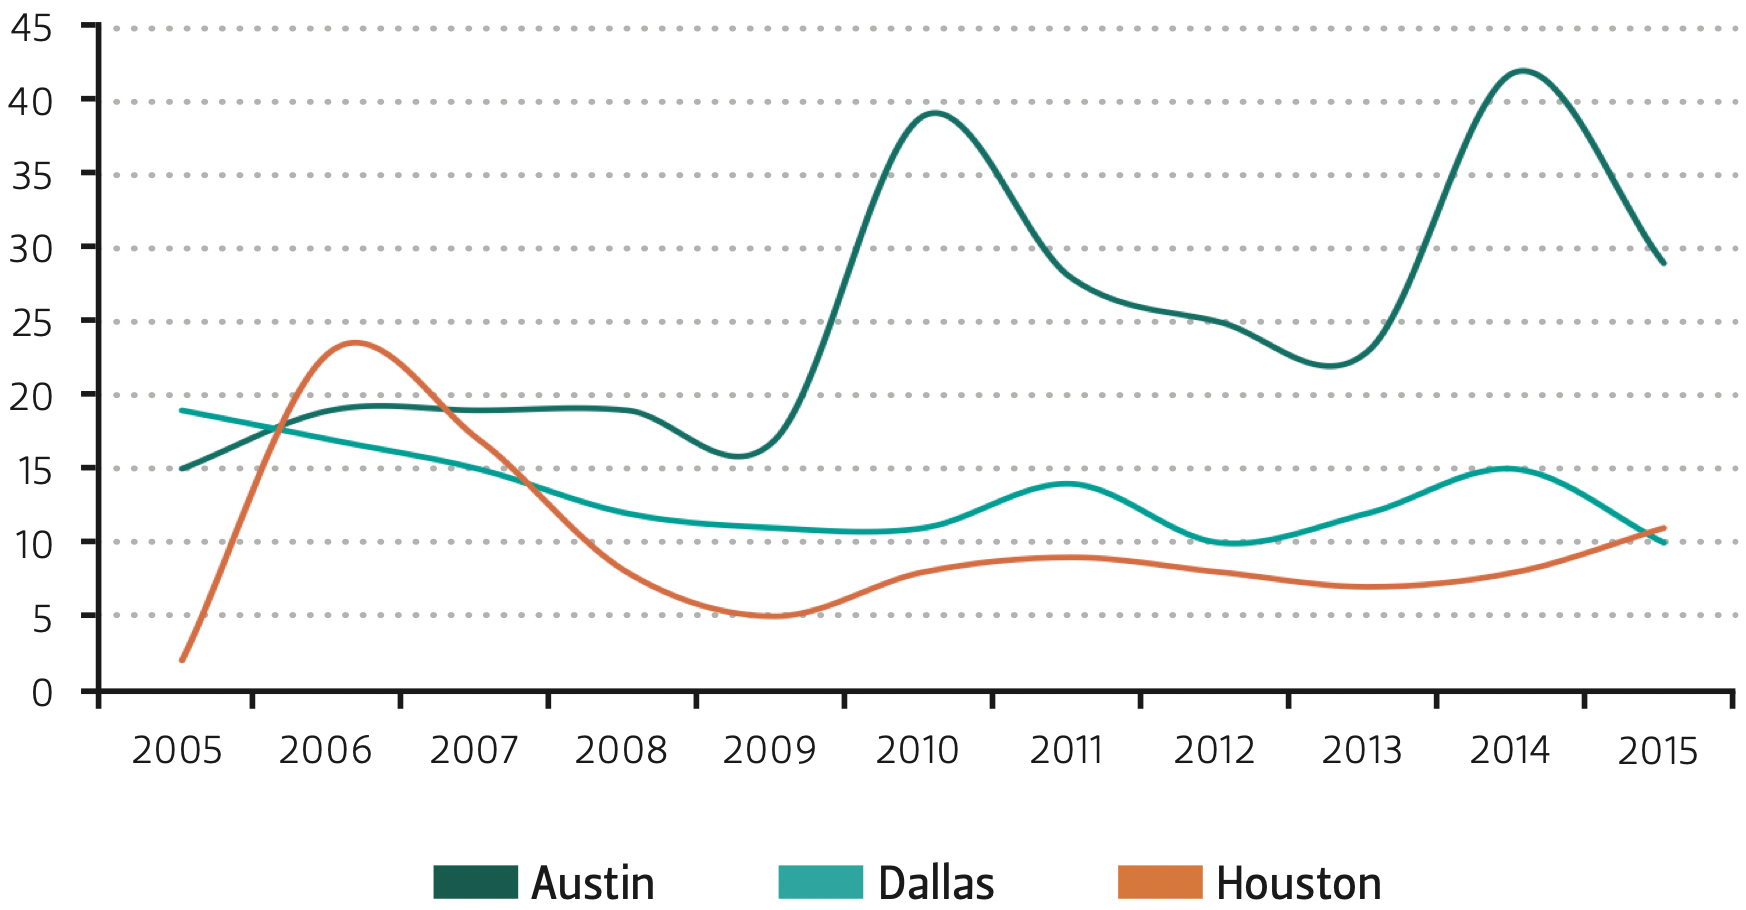 This graph compares the number of newly-financed start-ups in major Texas cities over time.